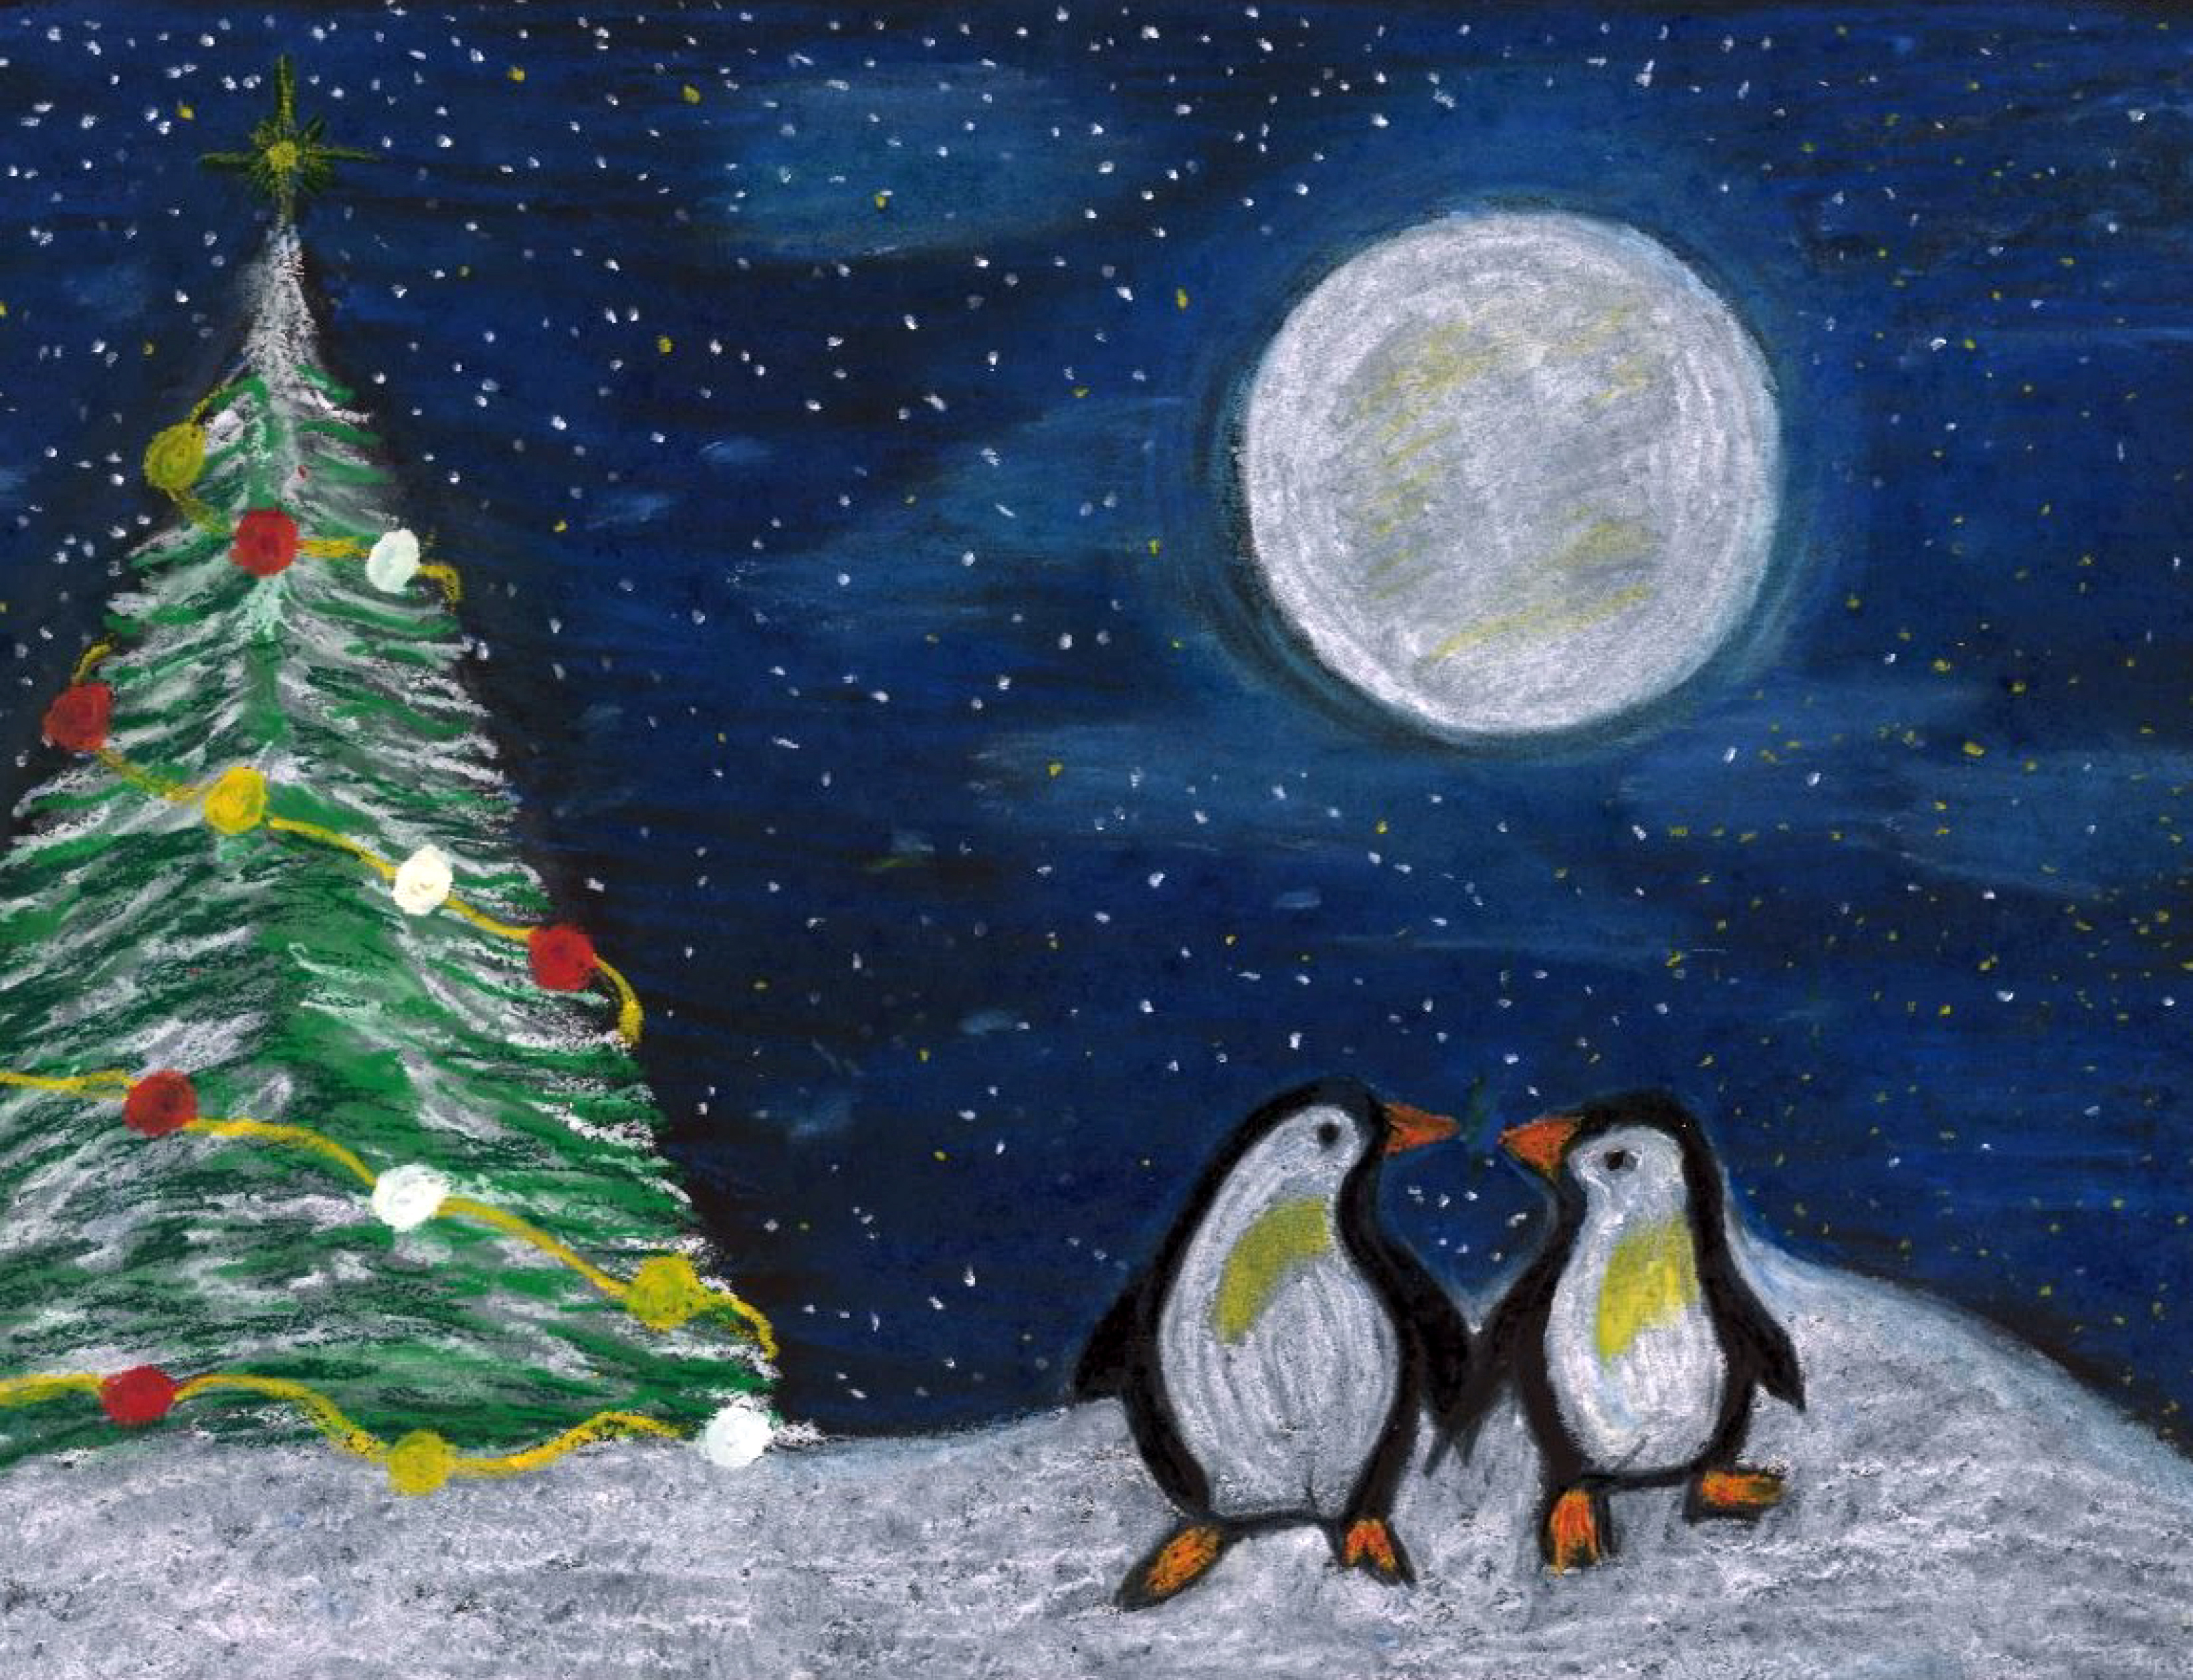 Penguins and a Christmas tree with a starry night sky in the background